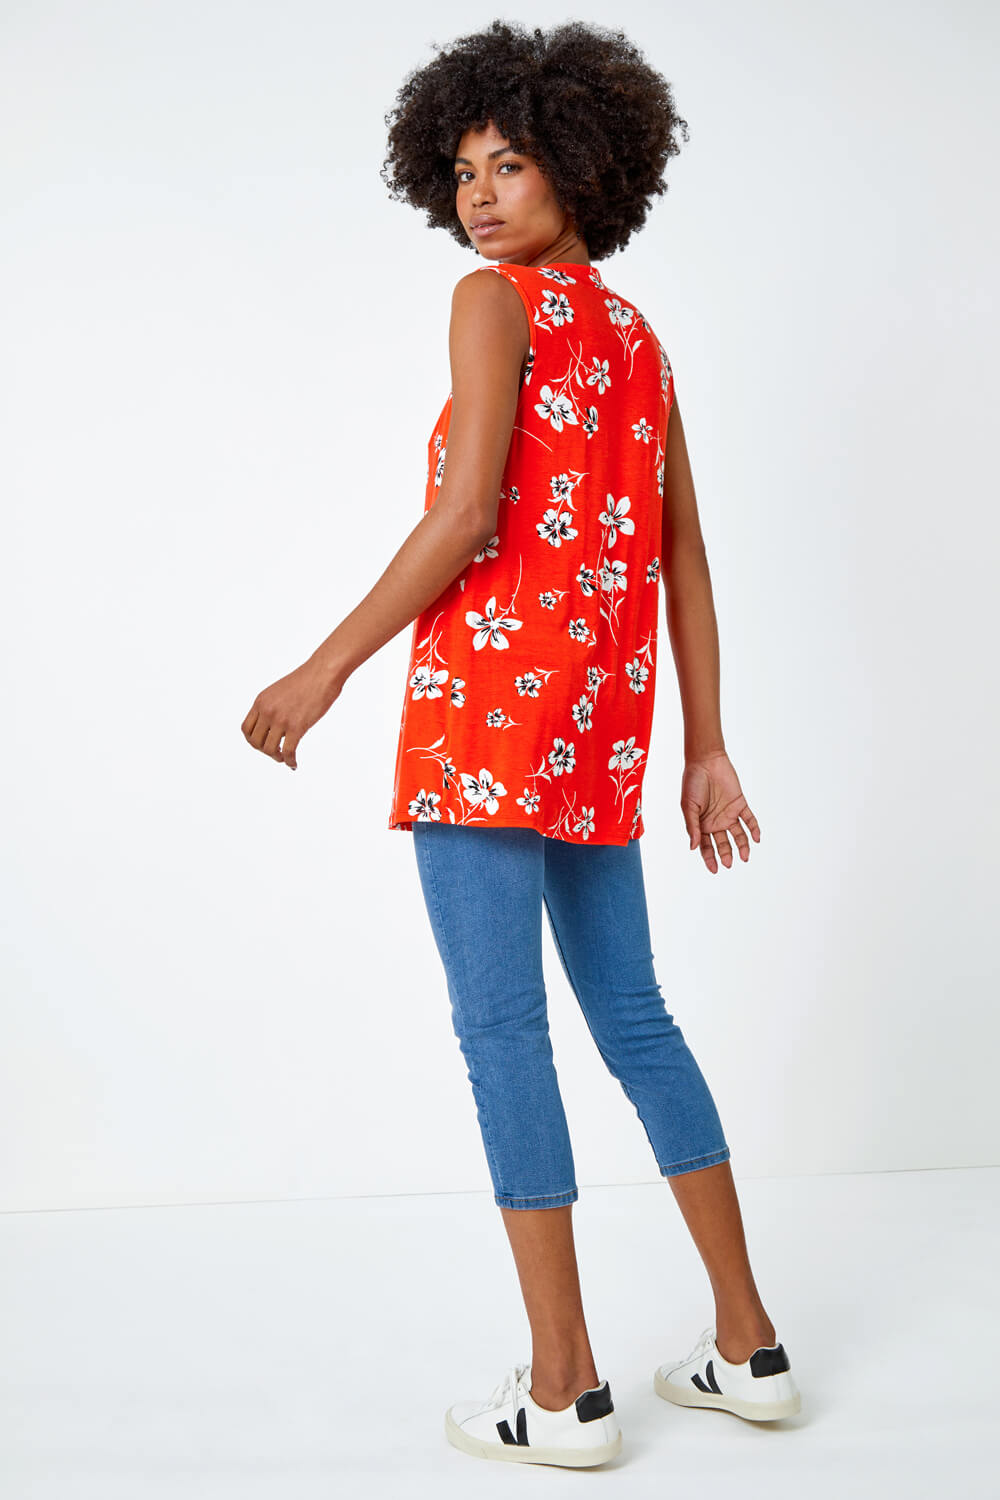 Red Sleeveless Floral Print Top, Image 3 of 5